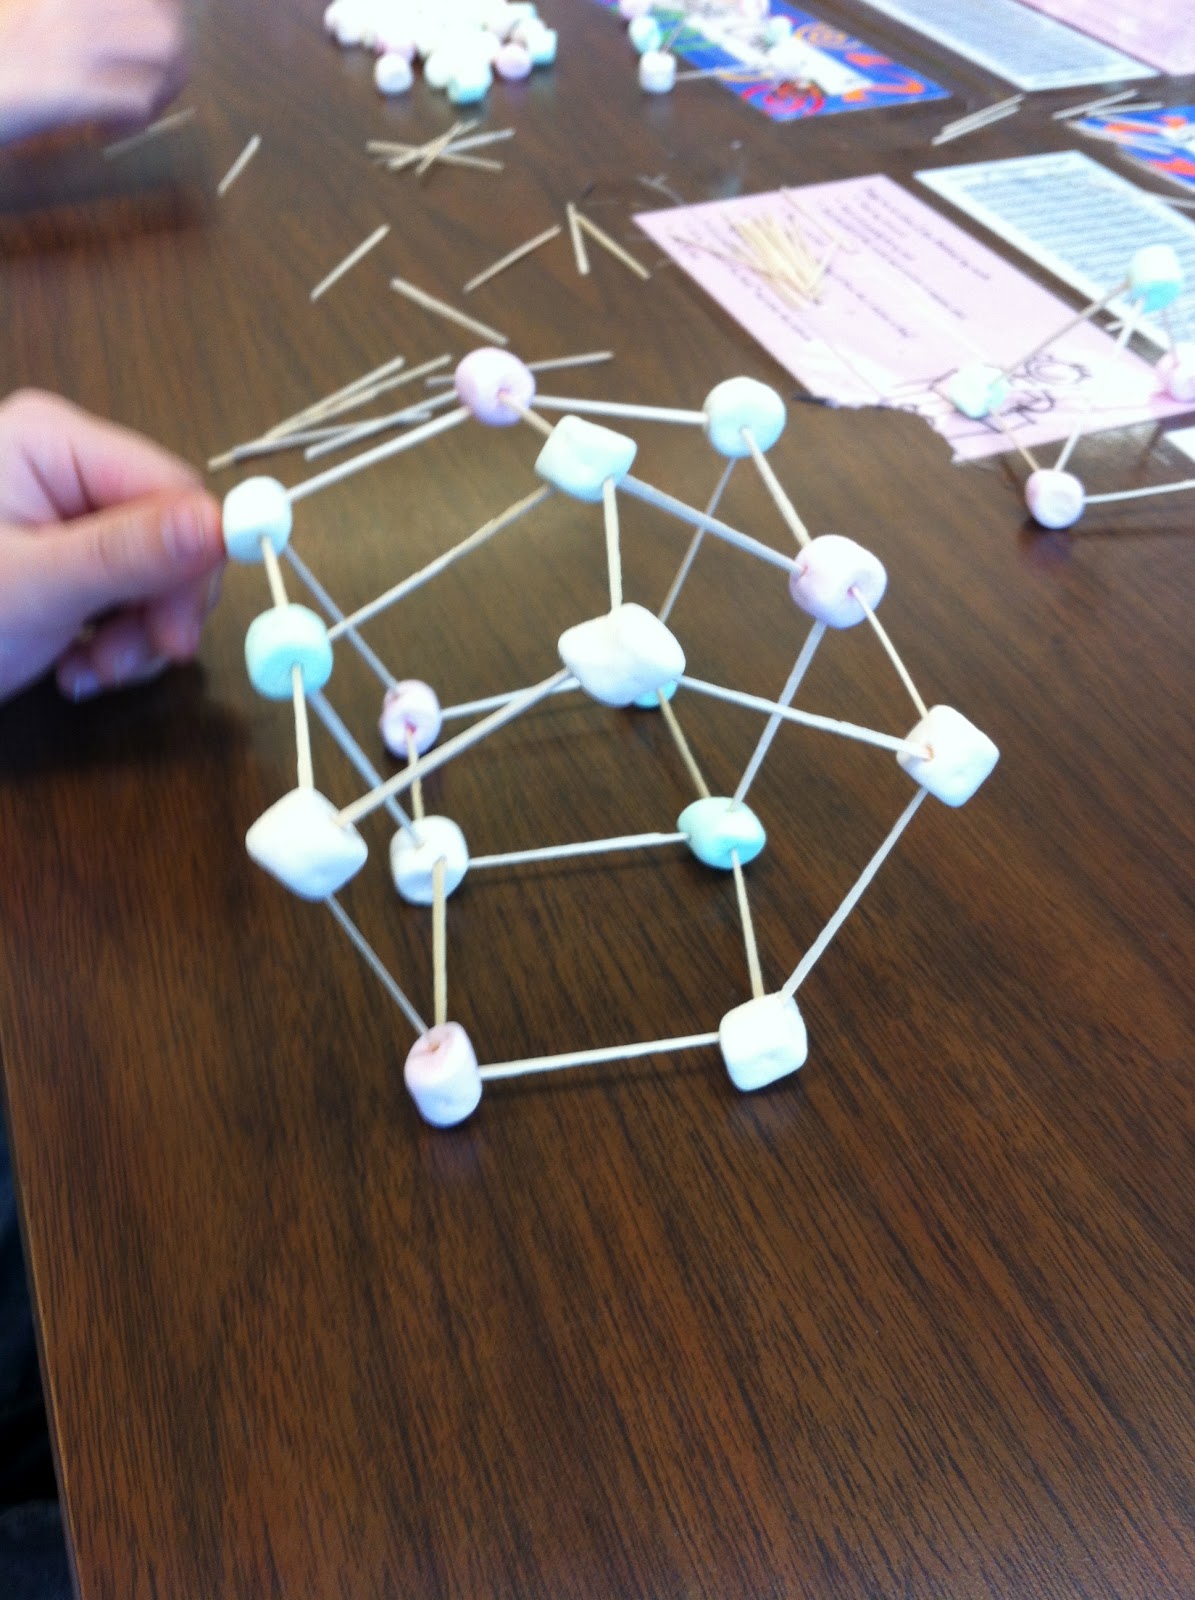 Investigating Learning In A Primary Classroom 2011 - 2012: Marshmallow/Toothpick GeoPanes1195 x 1600